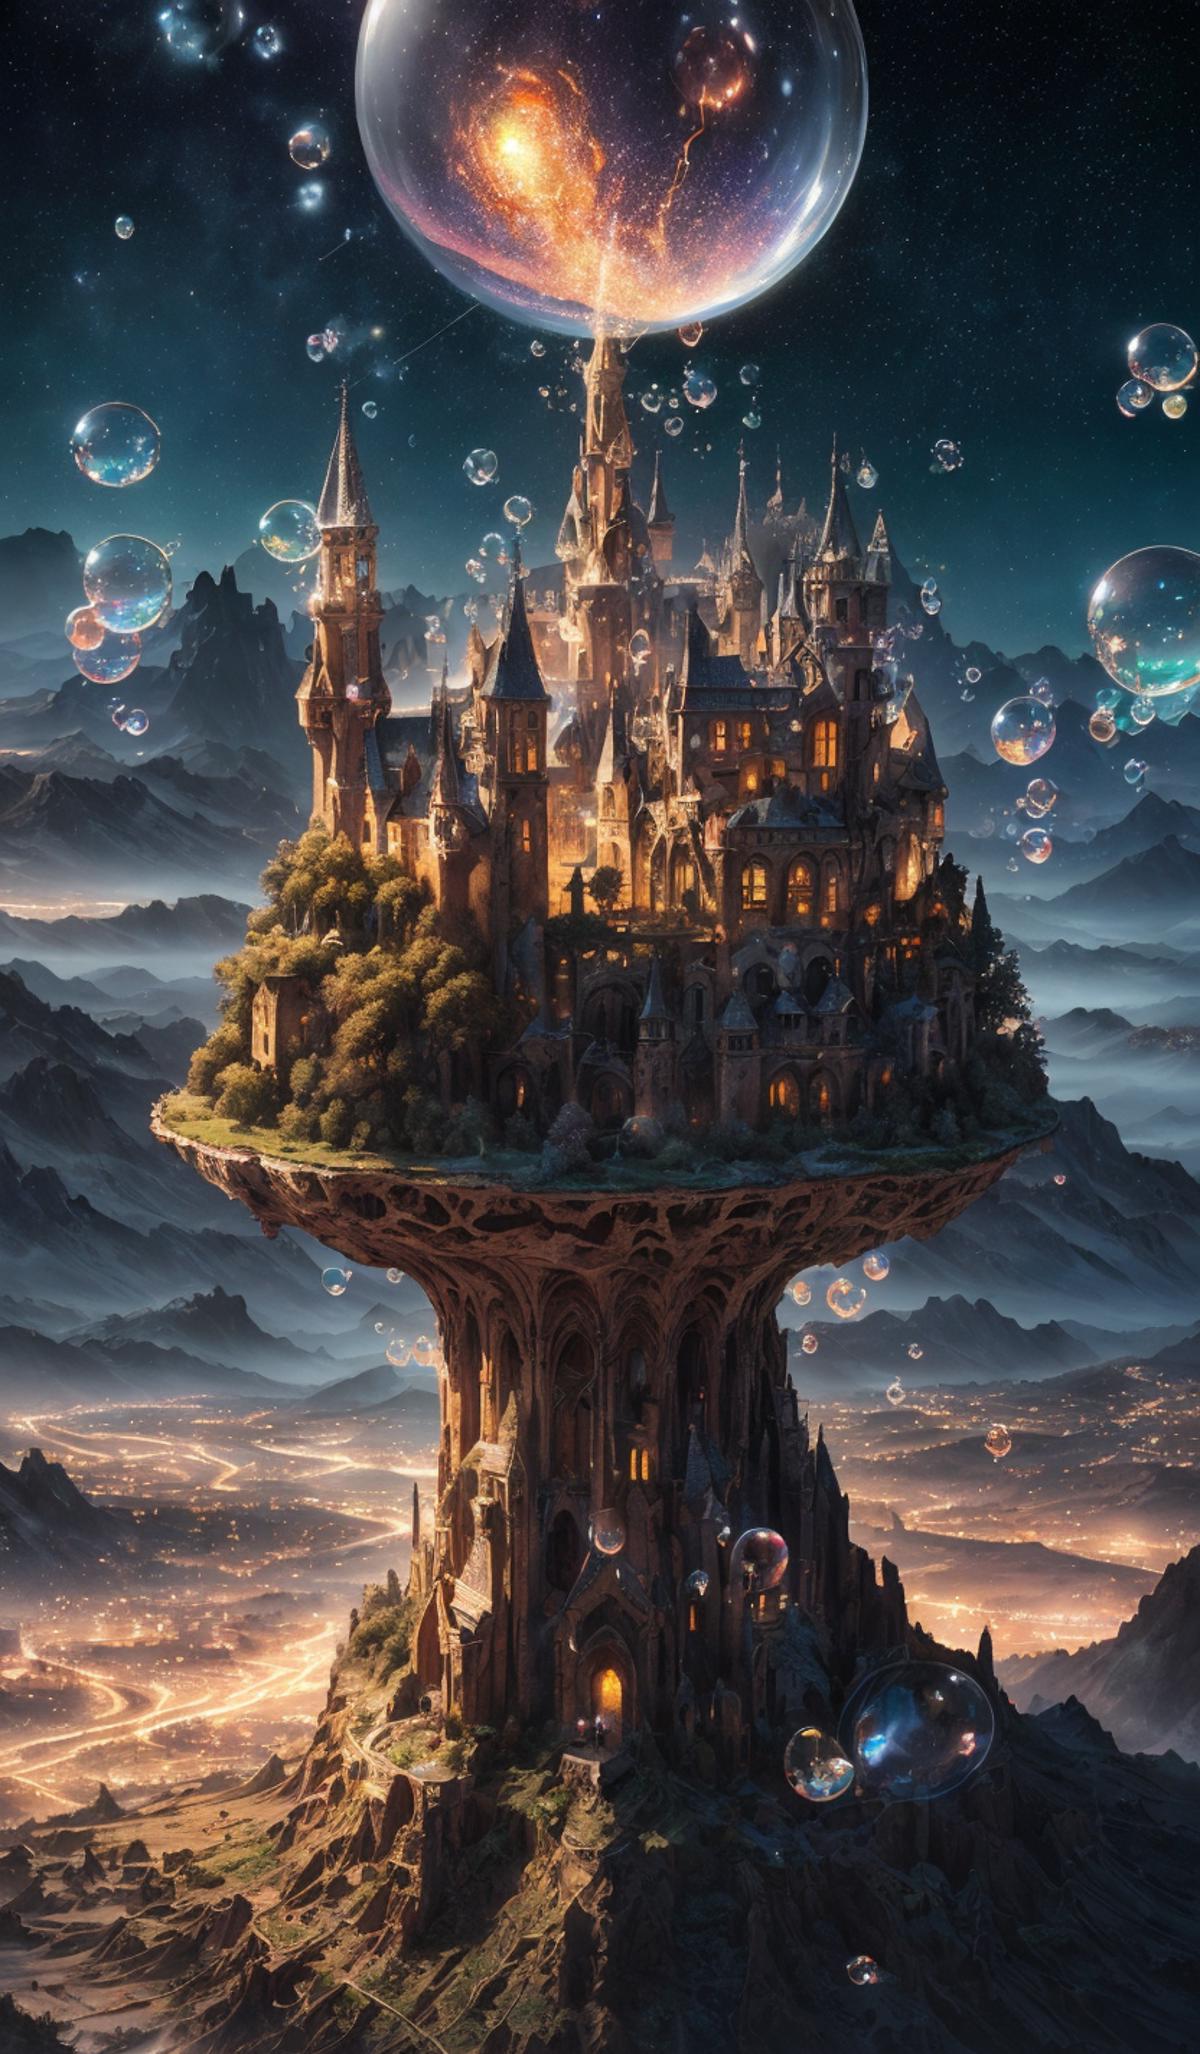 A Castle on a Mountain surrounded by Bubbles and Mountains, with a Medieval and Fantasy atmosphere.